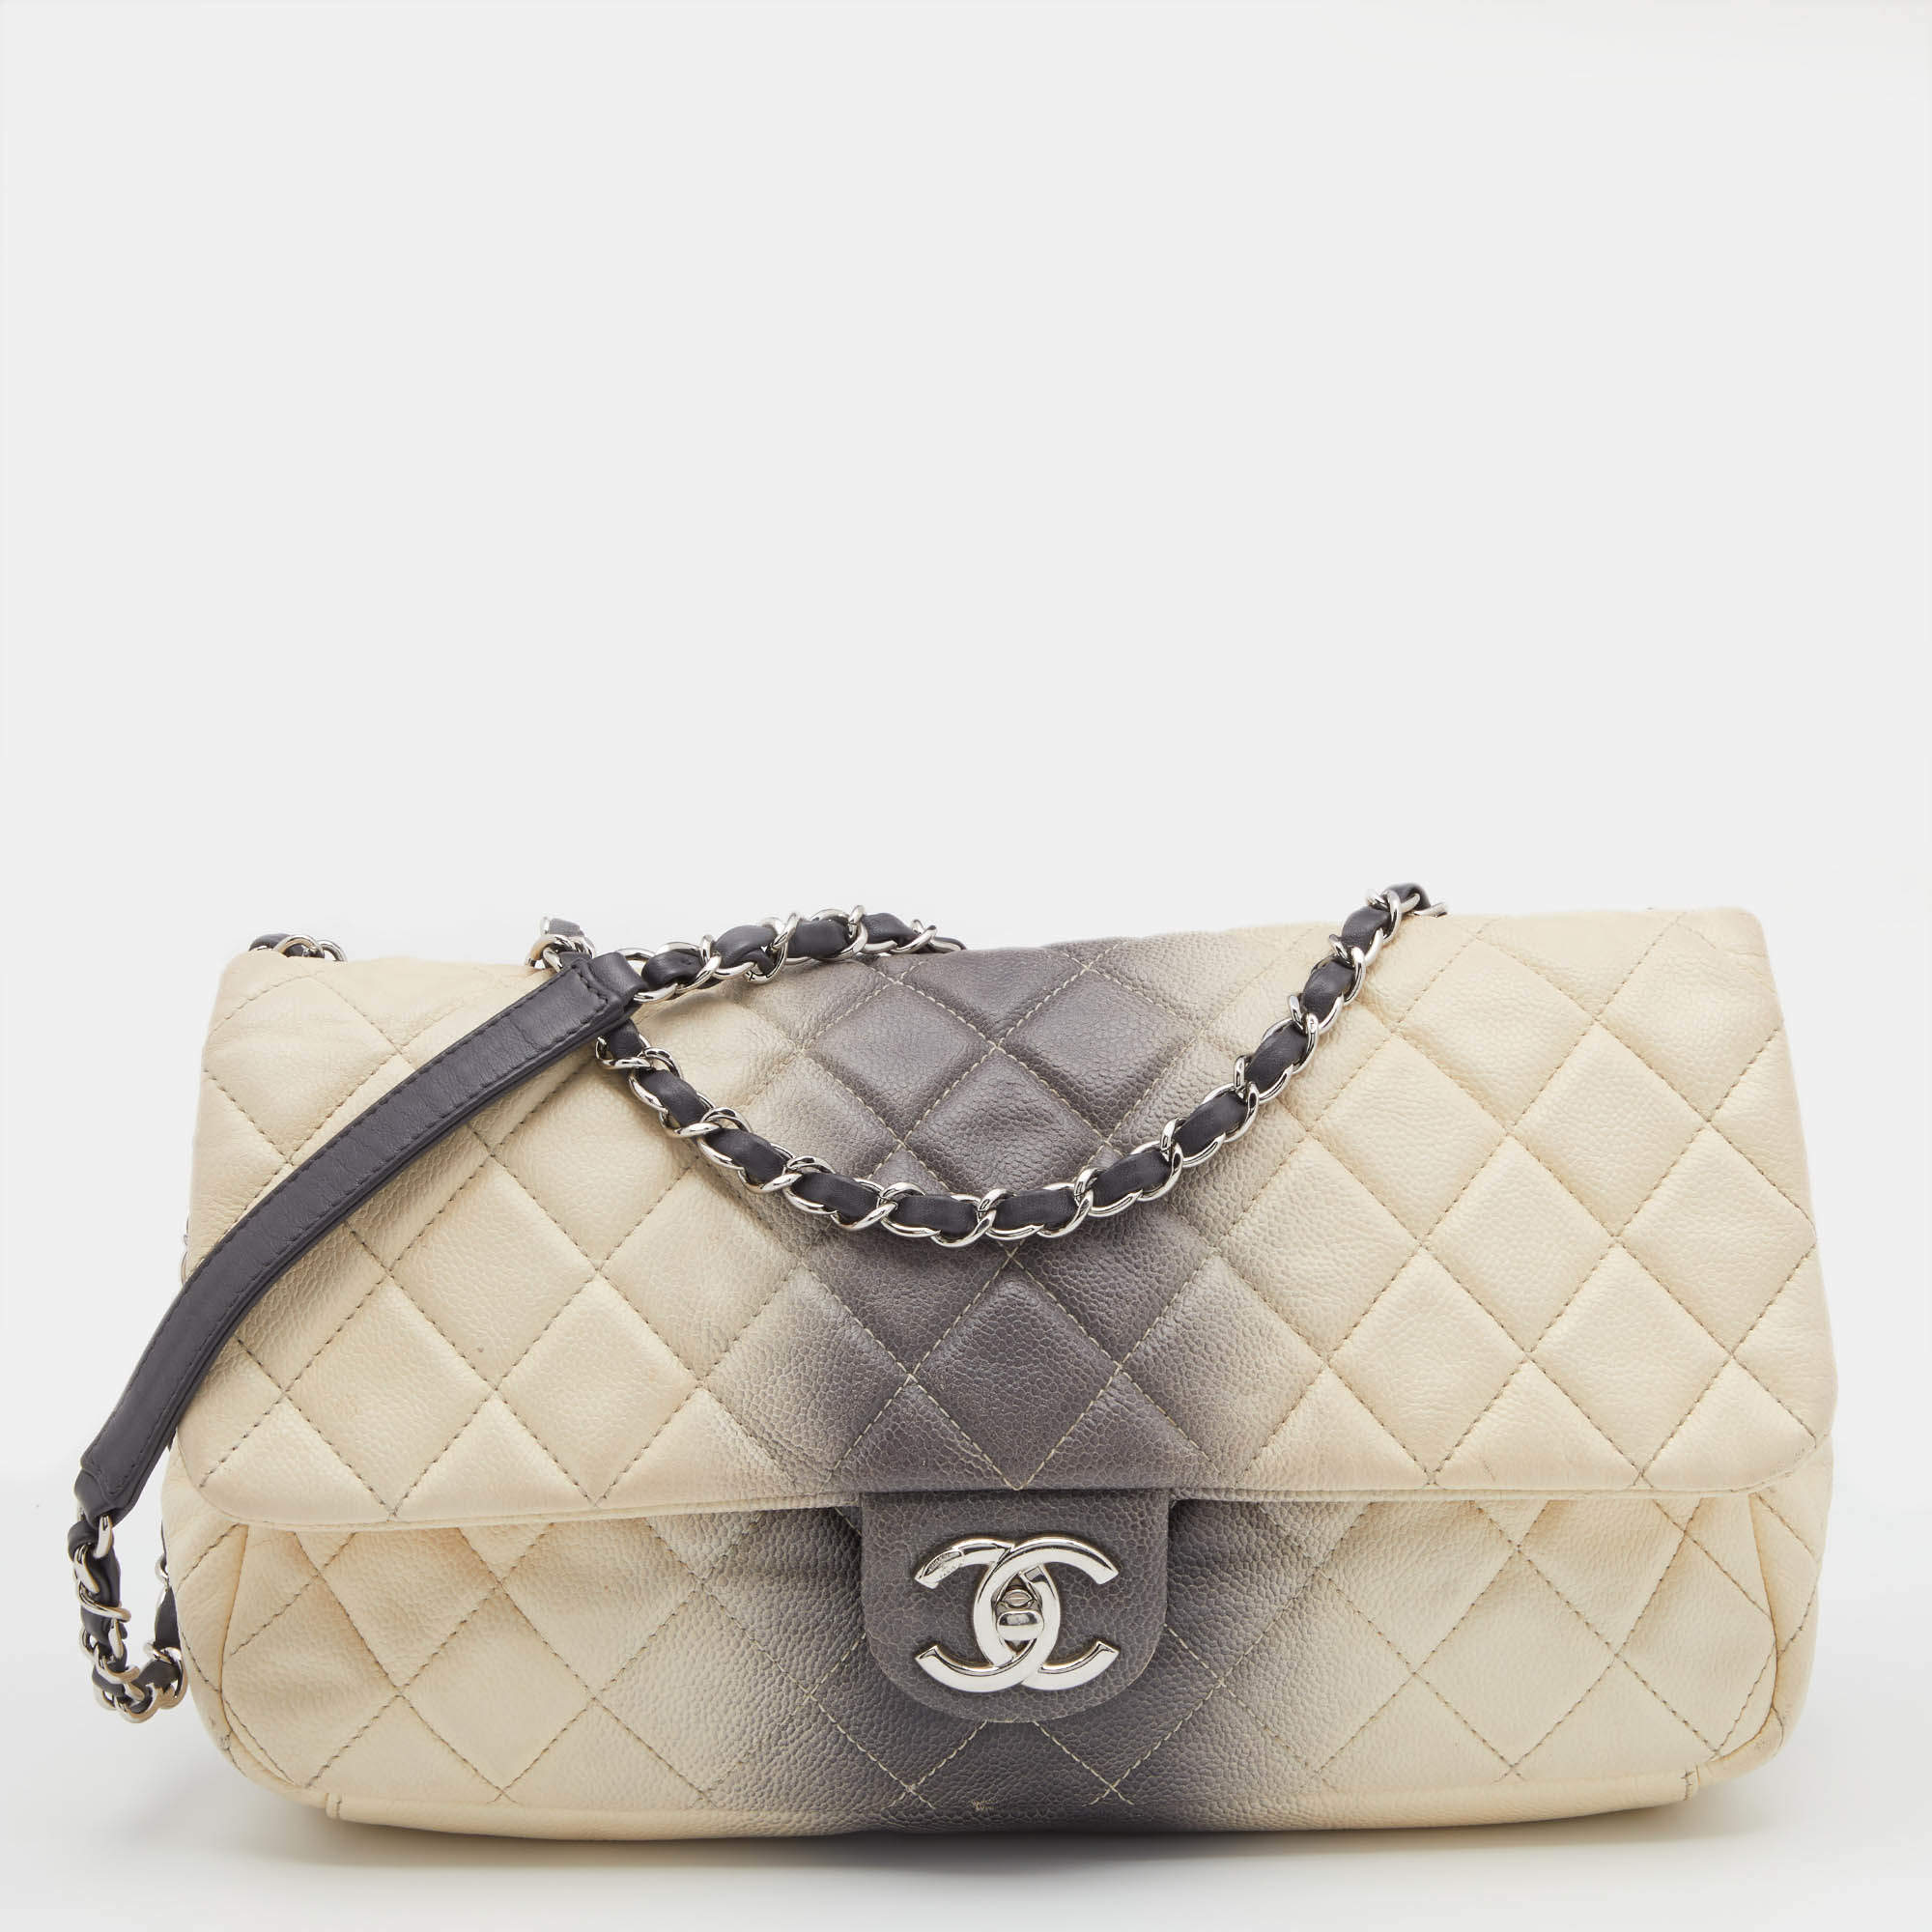 Chanel Cream/Grey Ombre Quilted Caviar Leather Jumbo Classic Single Flap Bag